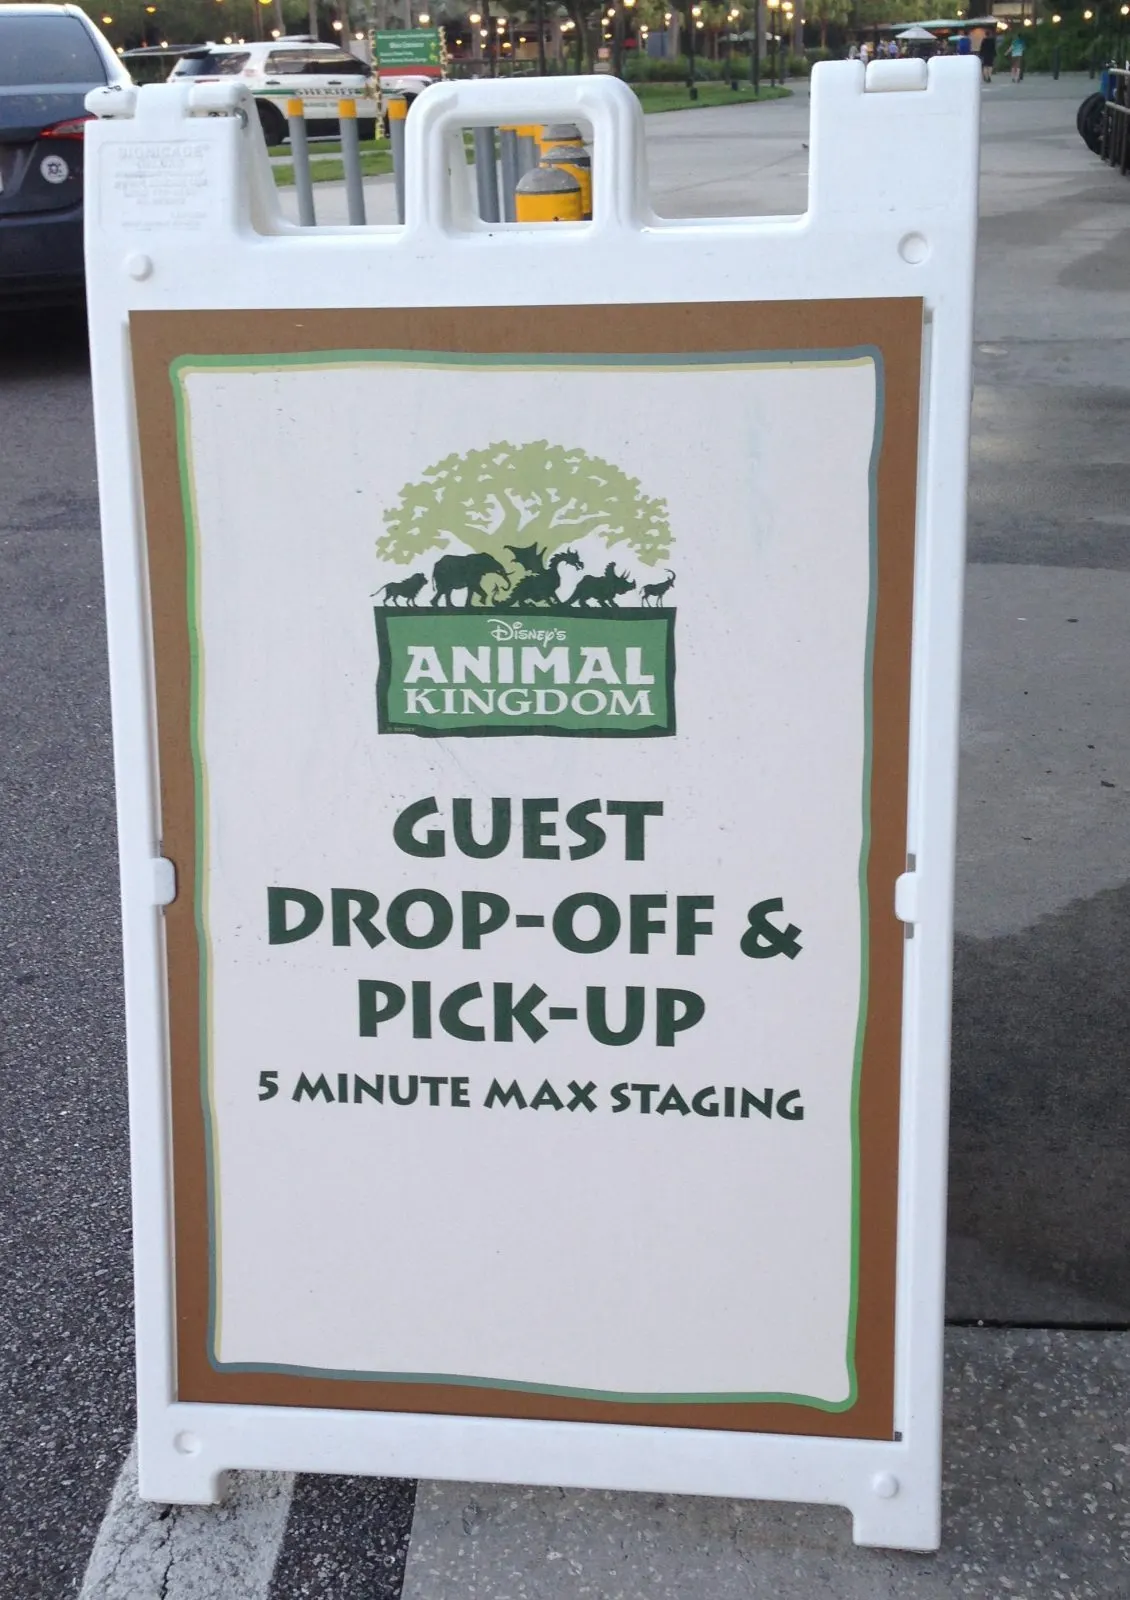 Guest Drop-off and Pick-up sign at Animal Kingdom